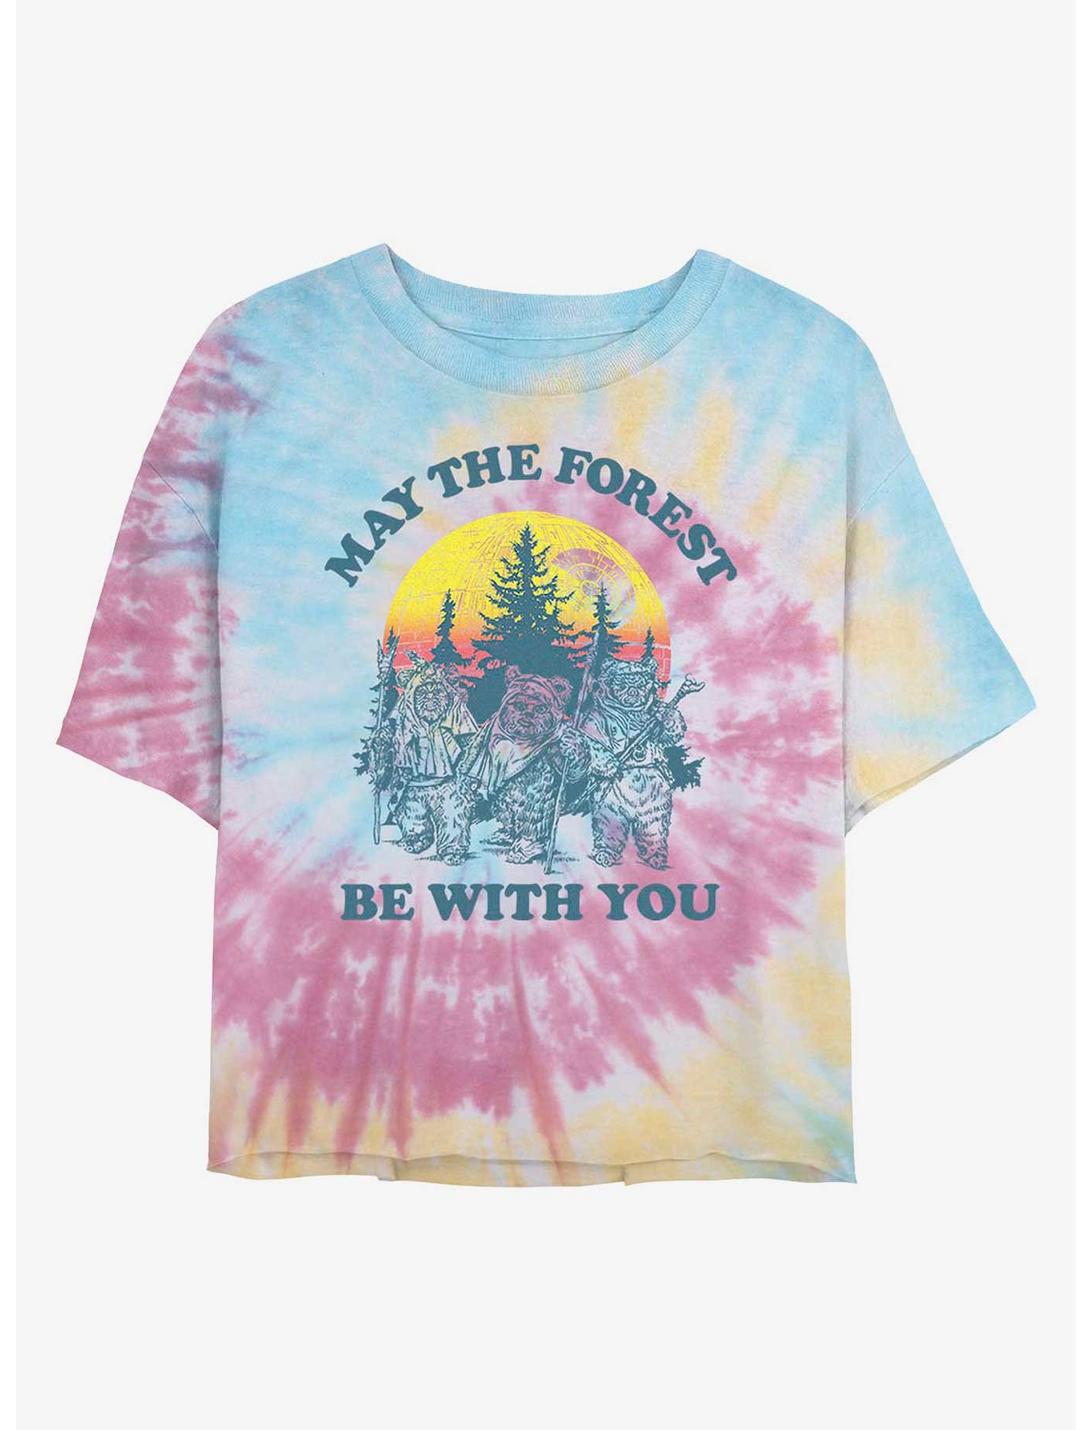 Star Wars Ewok May The Forest Be With You Womens Tie-Dye Crop T-Shirt, BLUPNKLY, hi-res